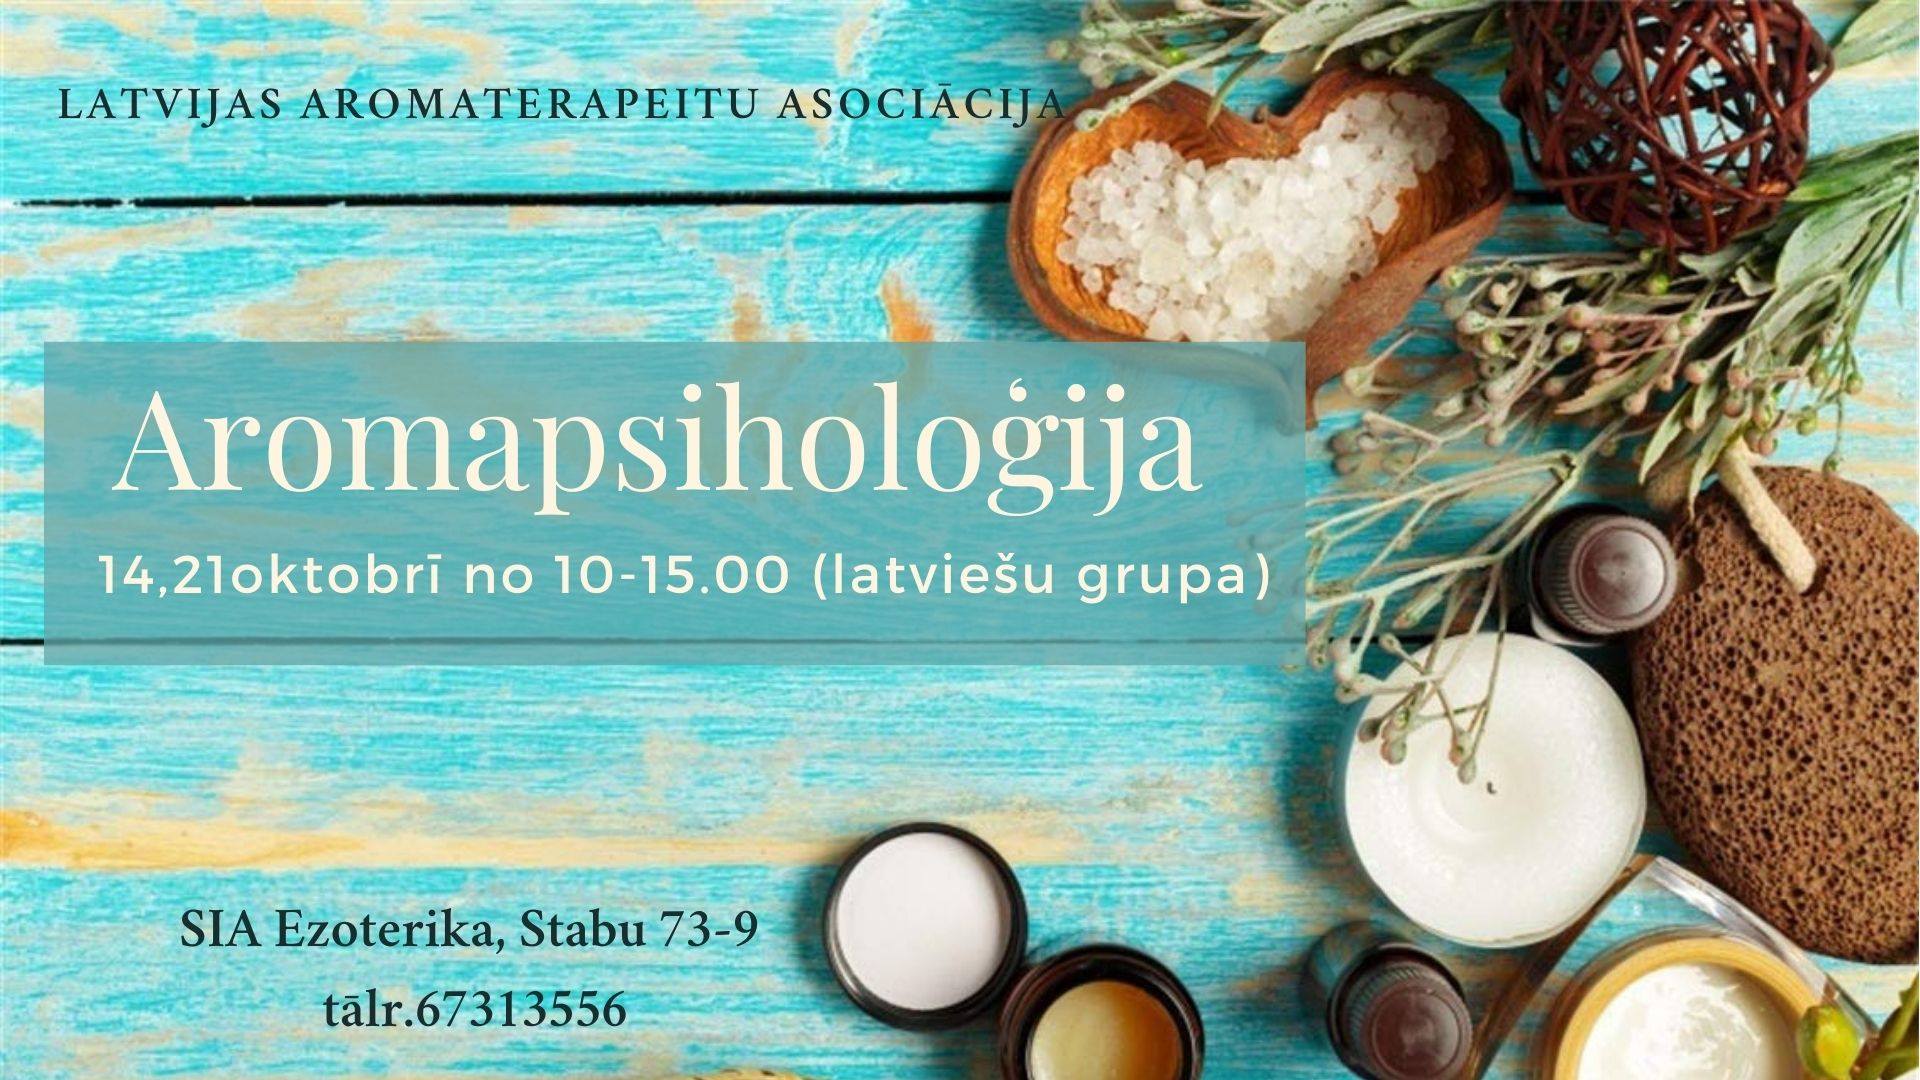 14.10.2020 and 21.10.2020 - FUNDAMENTALS OF AROMAPSIOLOGY AND AROMADIAGNOSTICS.